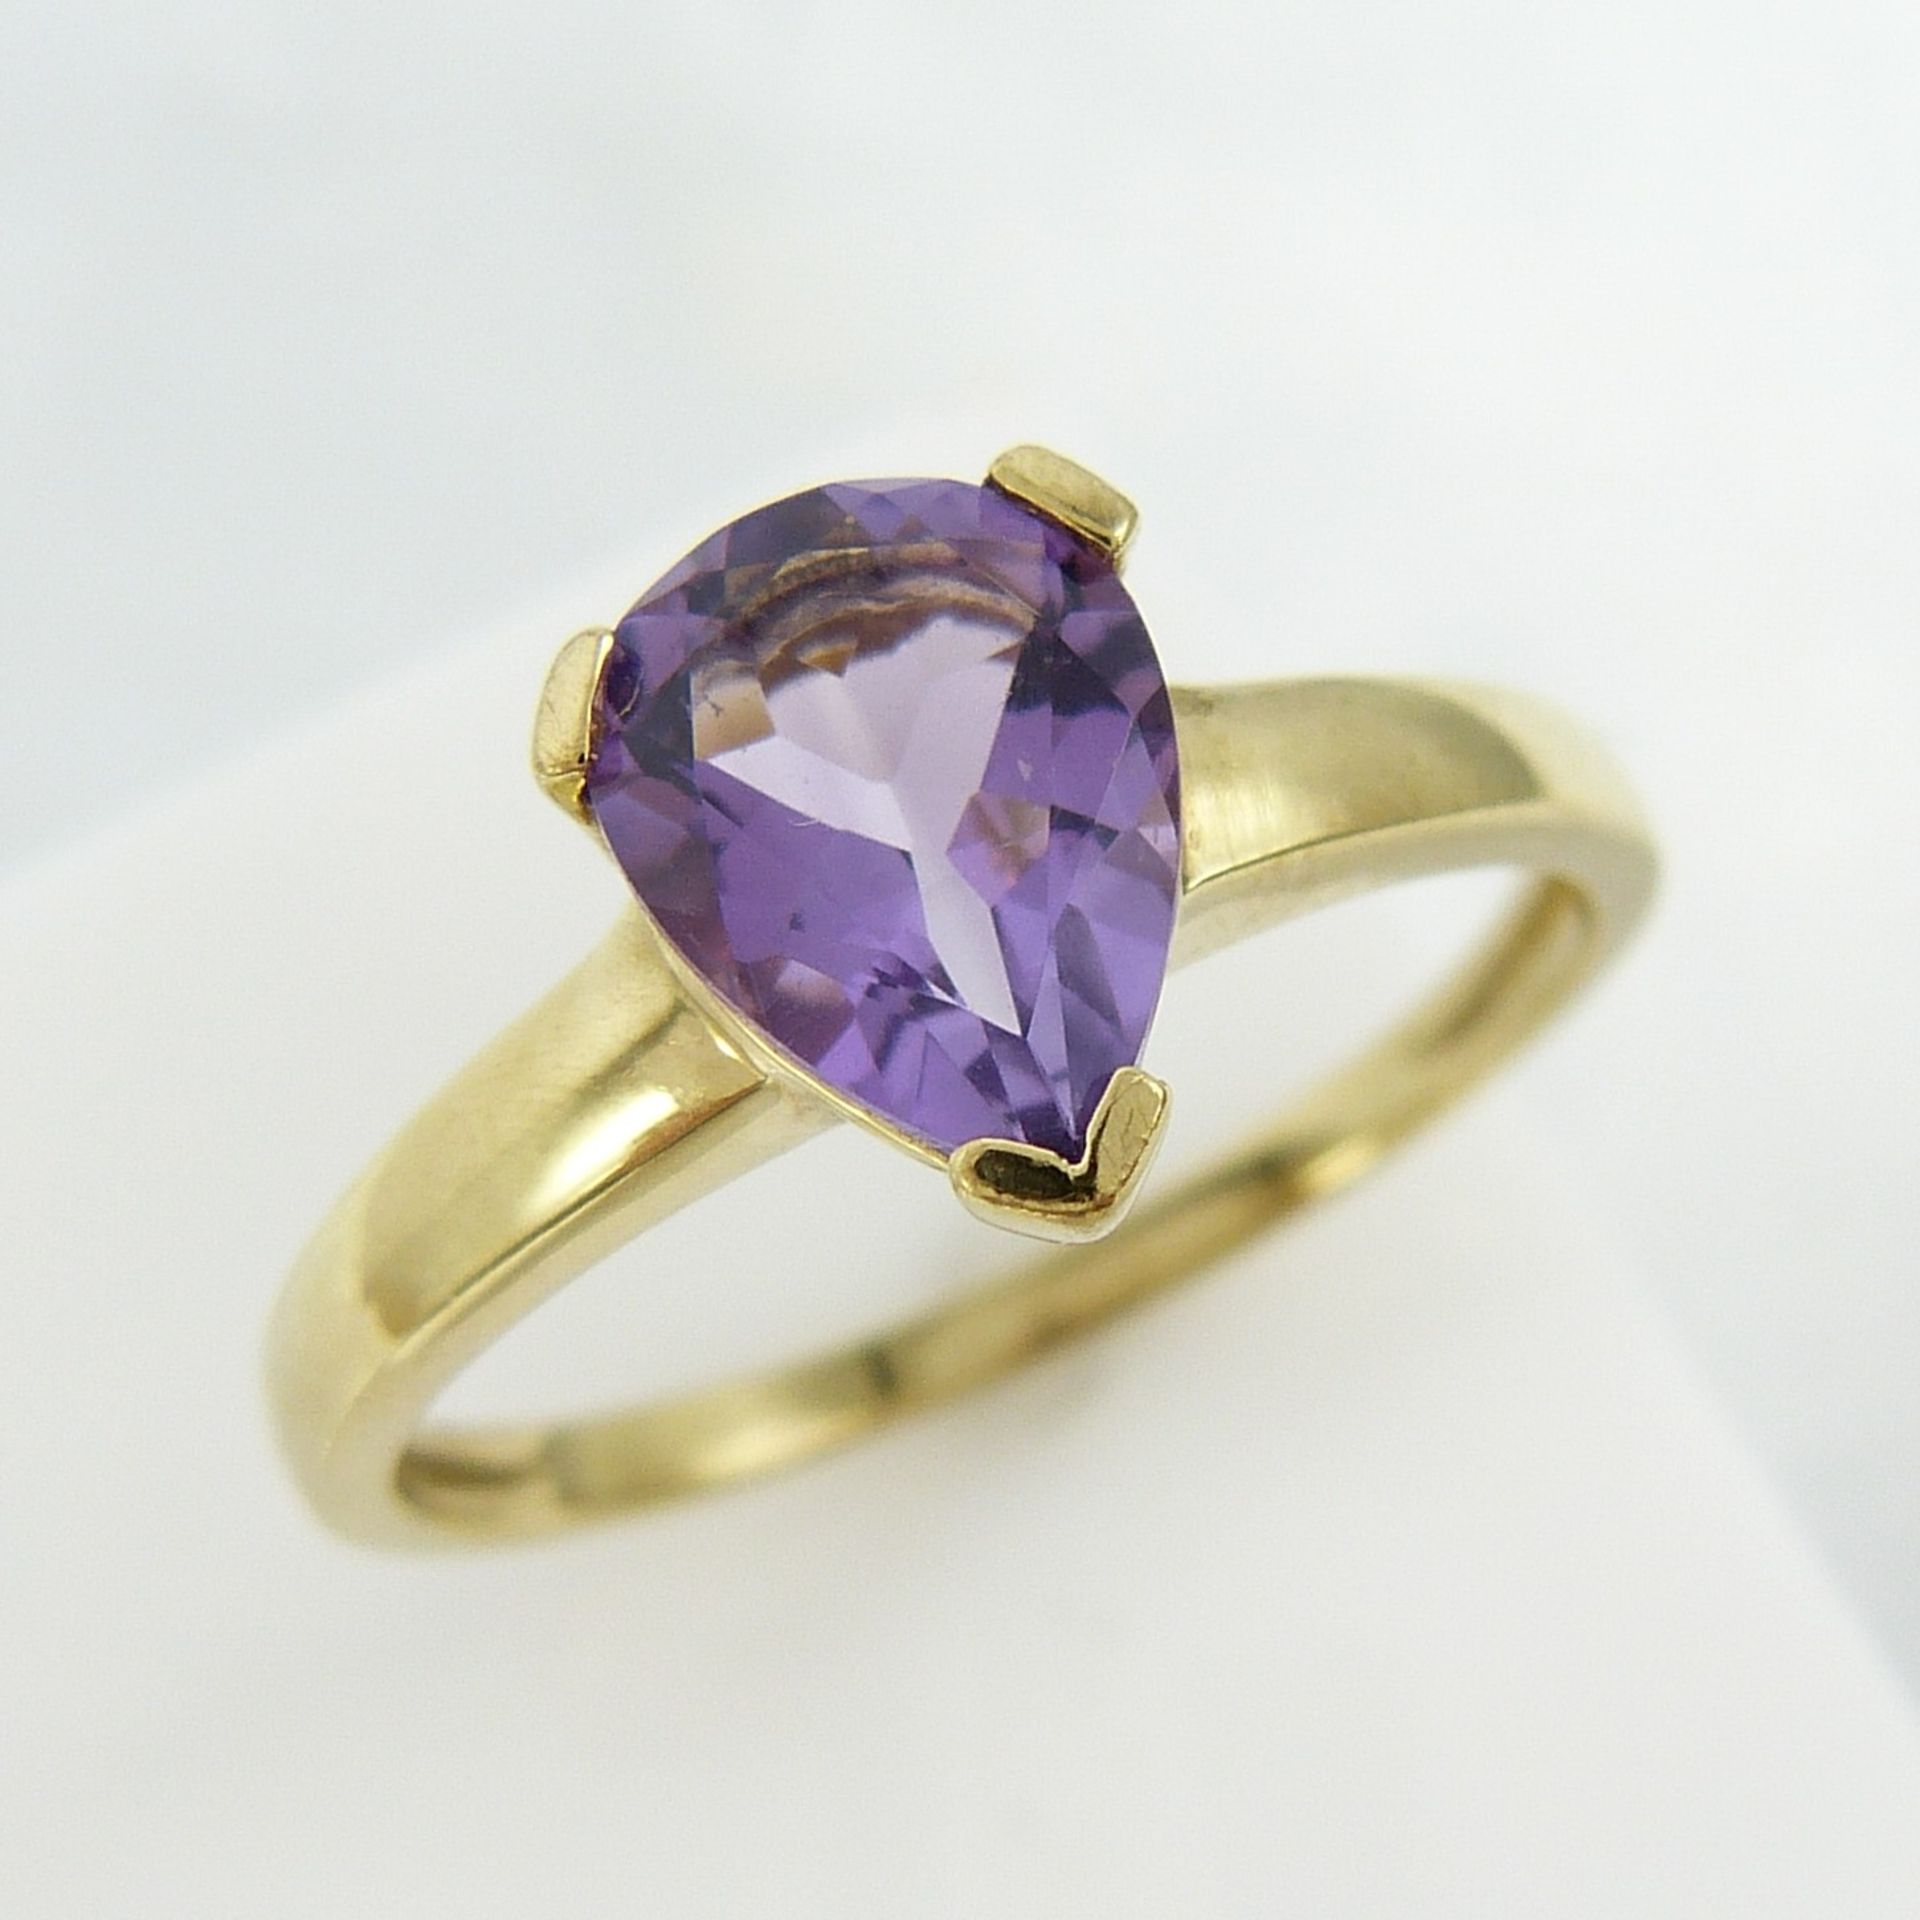 Pear-Cut Amethyst Dress Ring In 9K Yellow Gold - Image 4 of 6